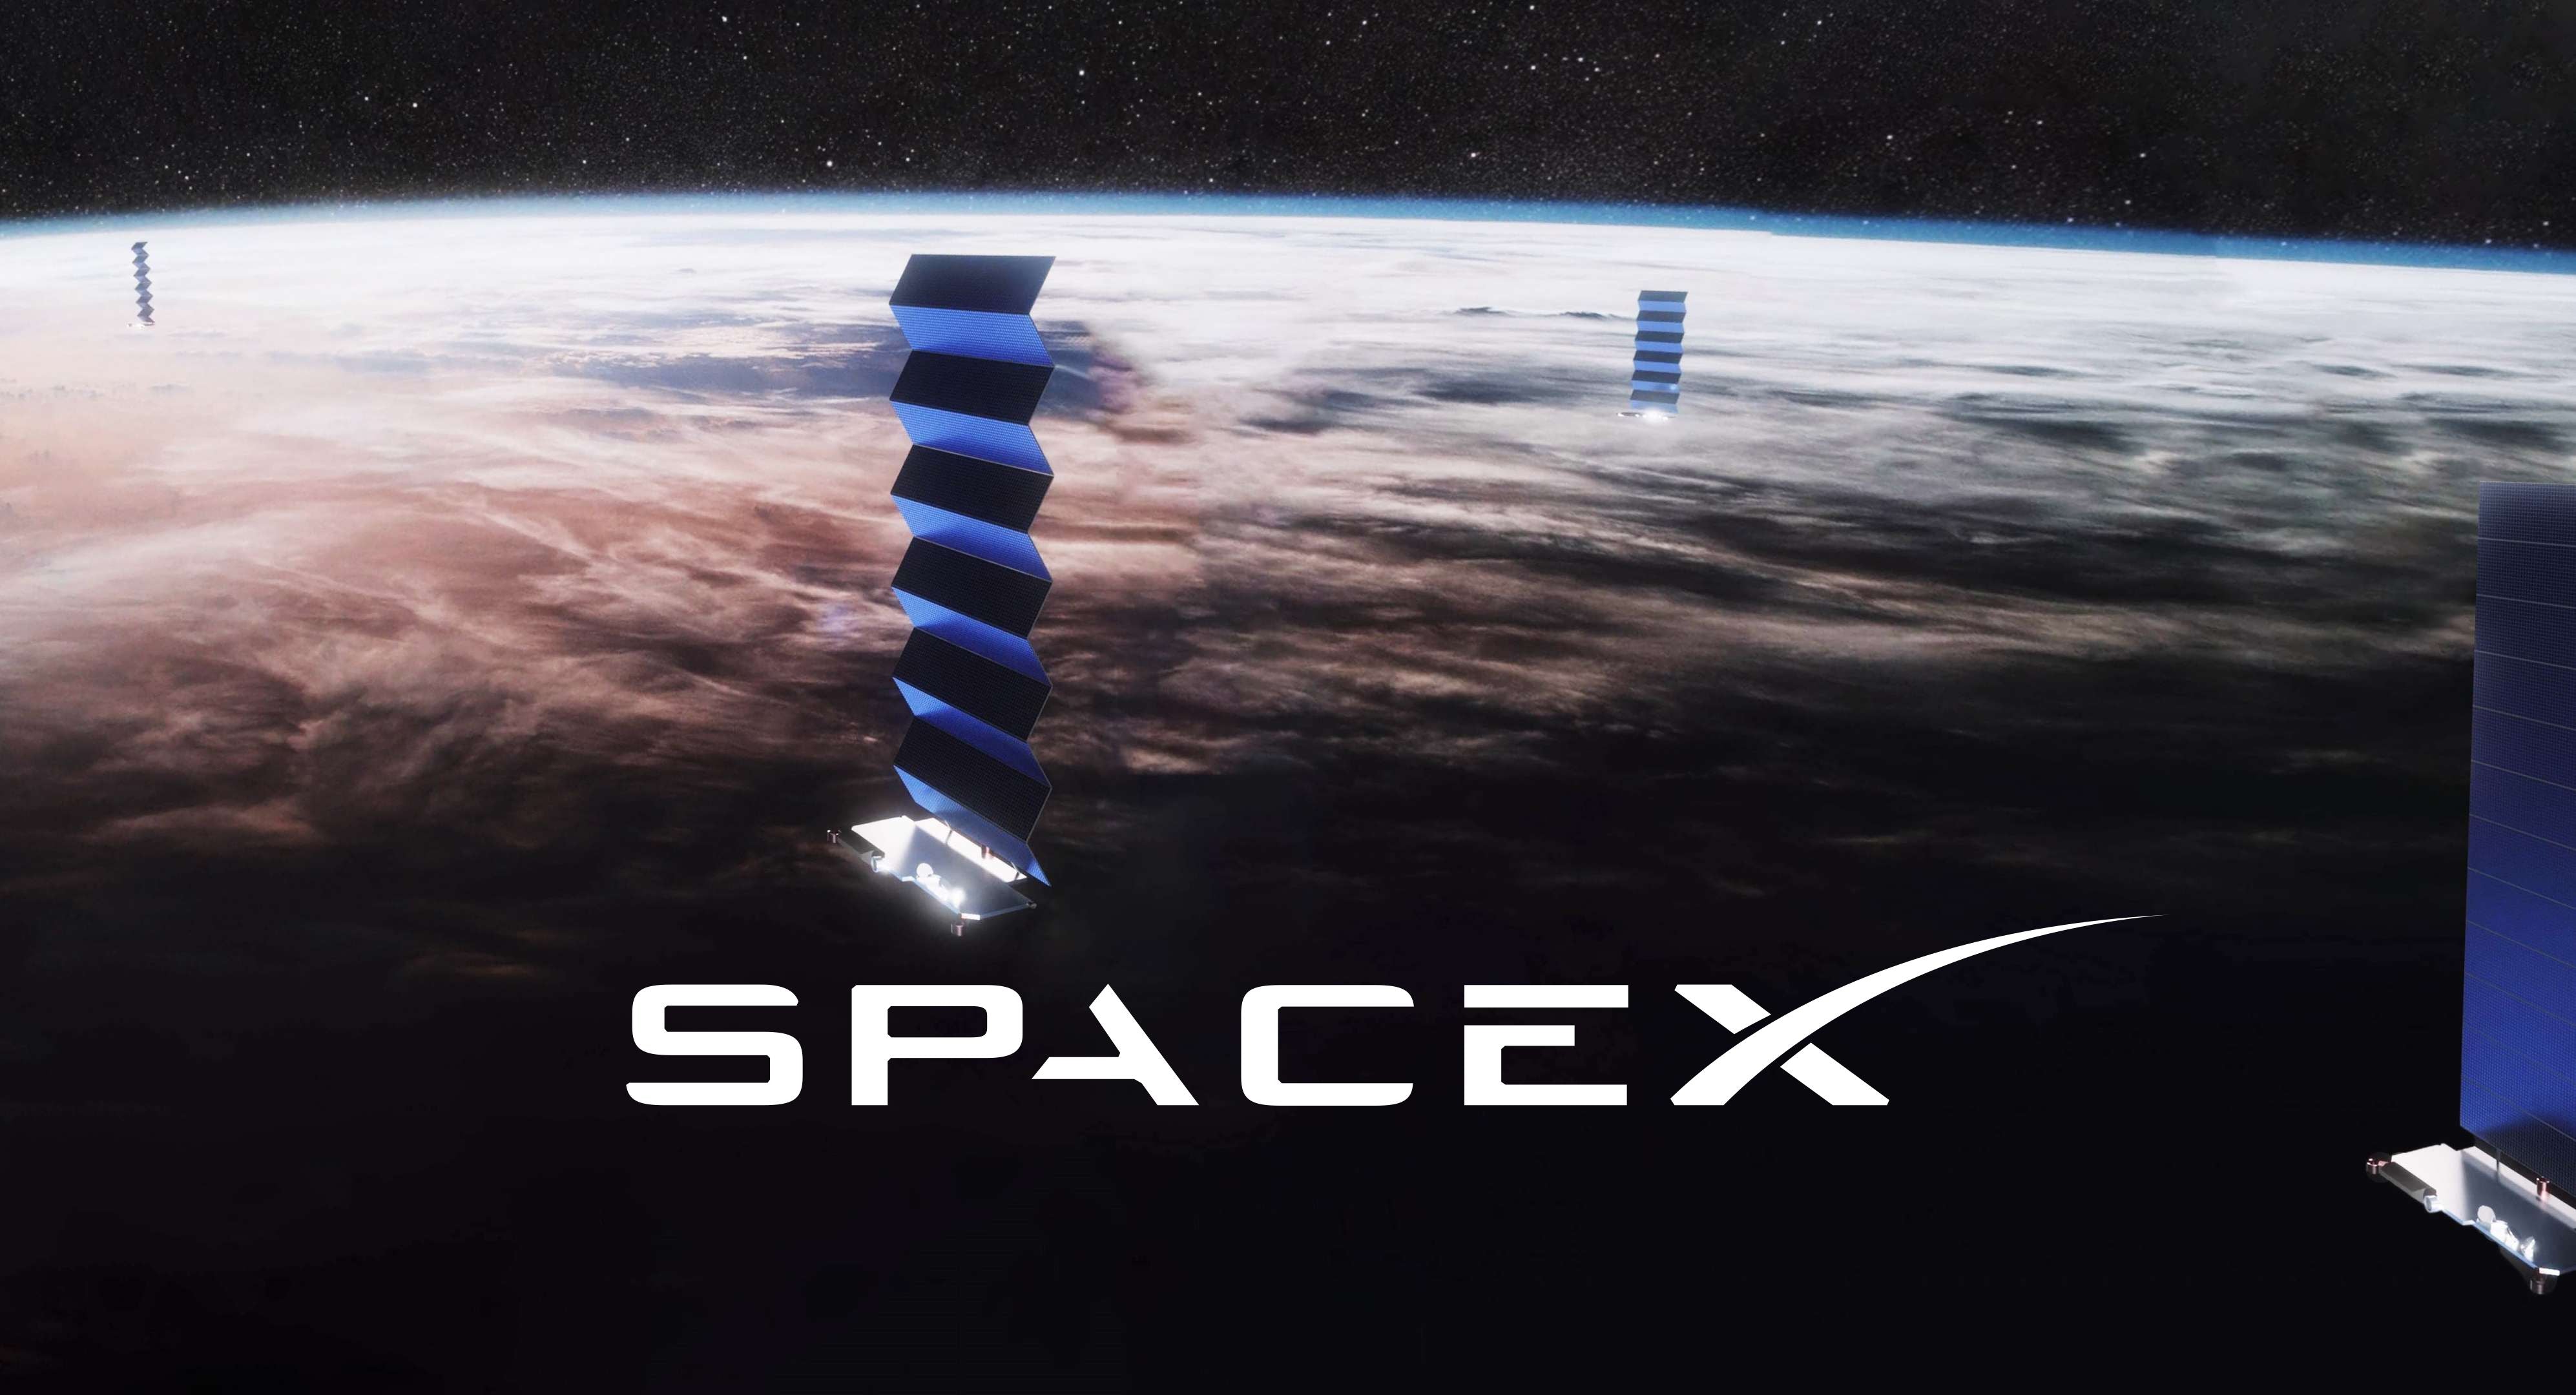 FCC requires SpaceX to prove Starlink's low latency in One month to qualify for rural broadband funding